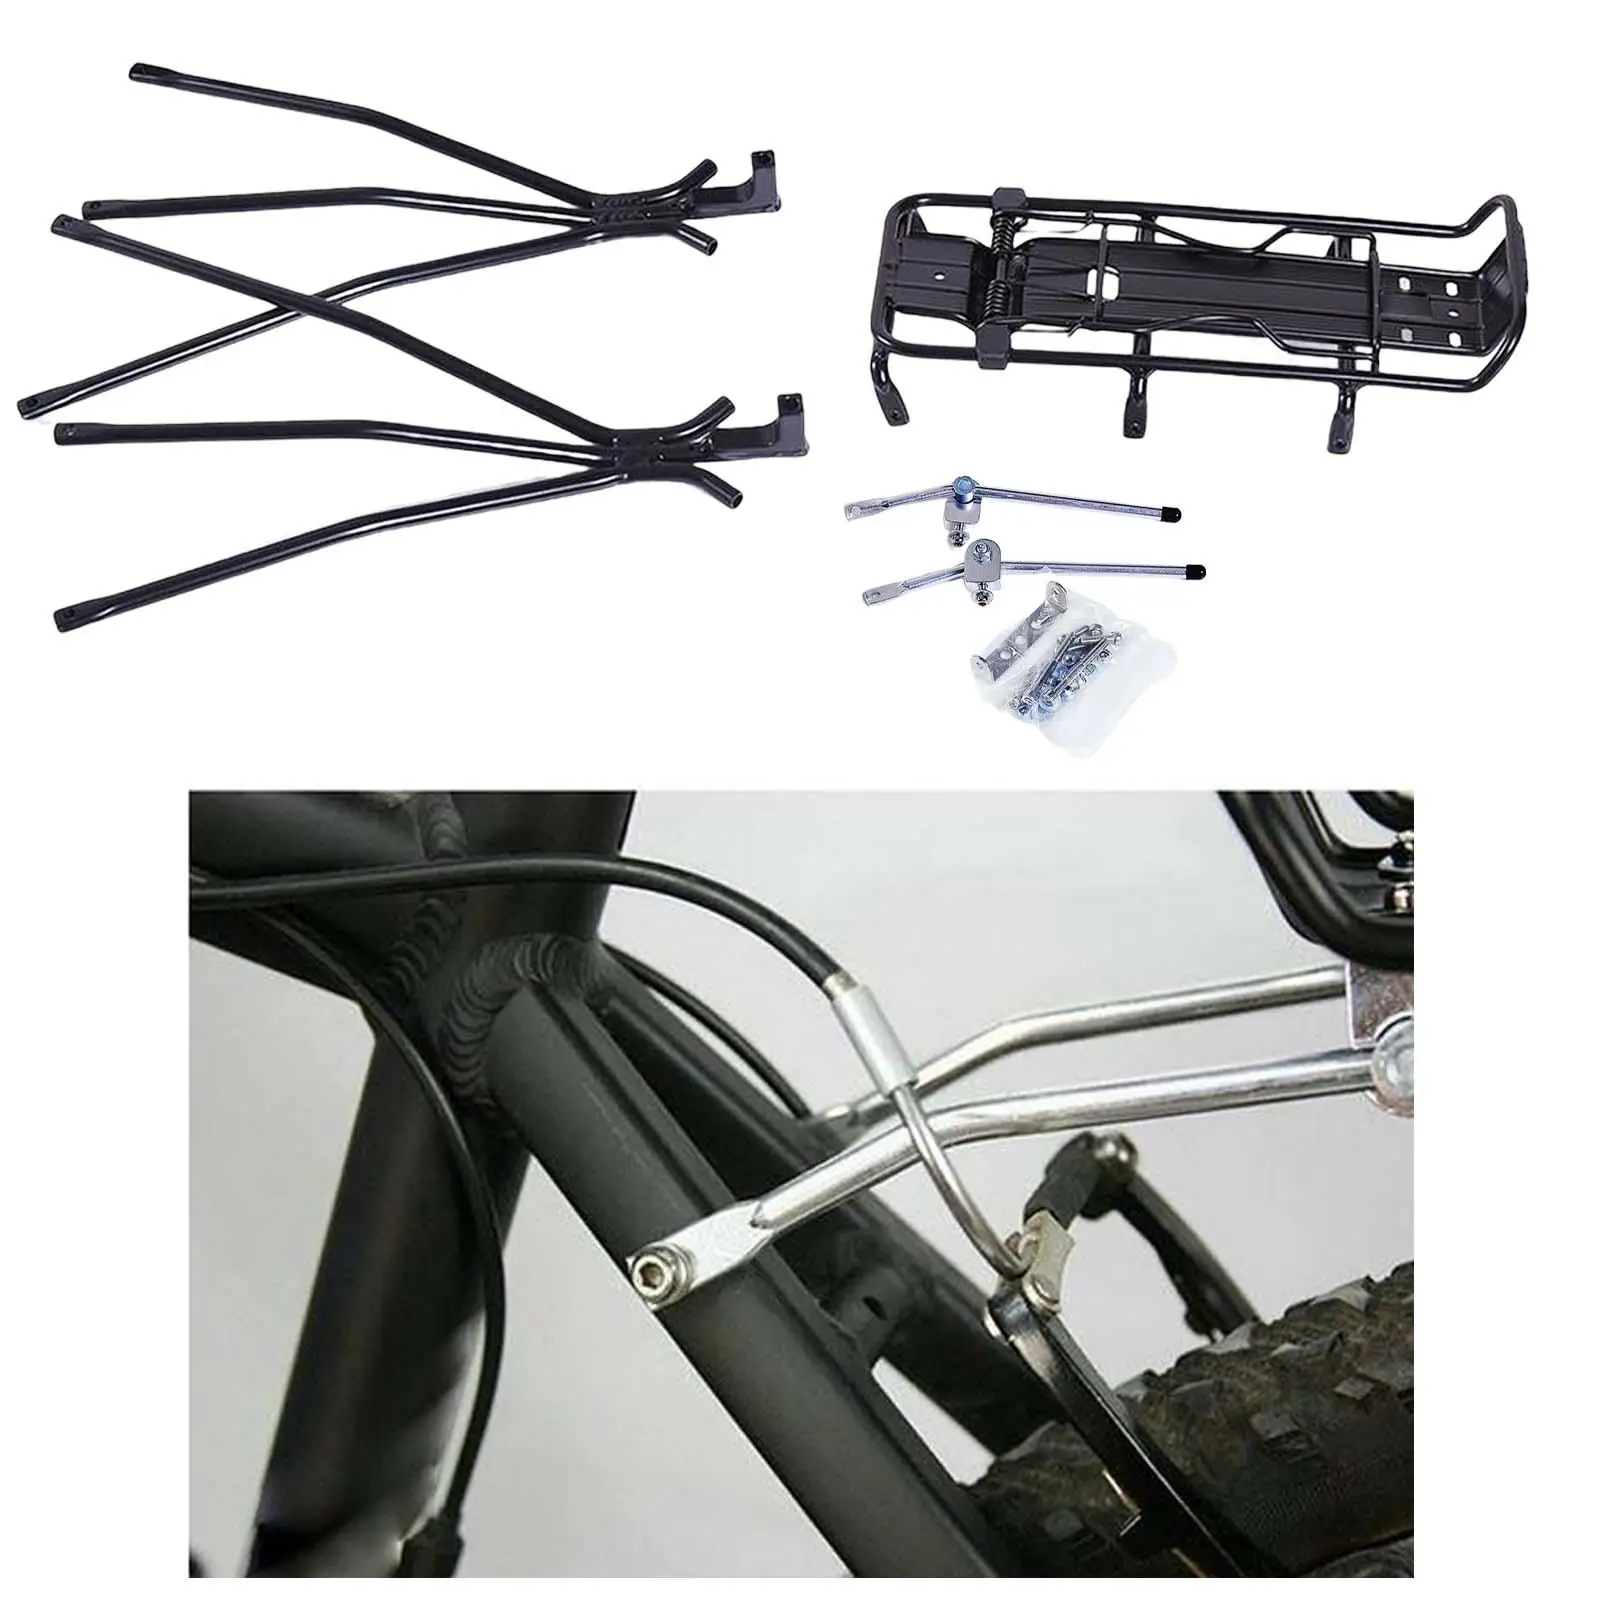 Mountain Road Rear Carrier Rack Pannier Rack Touring Carrying